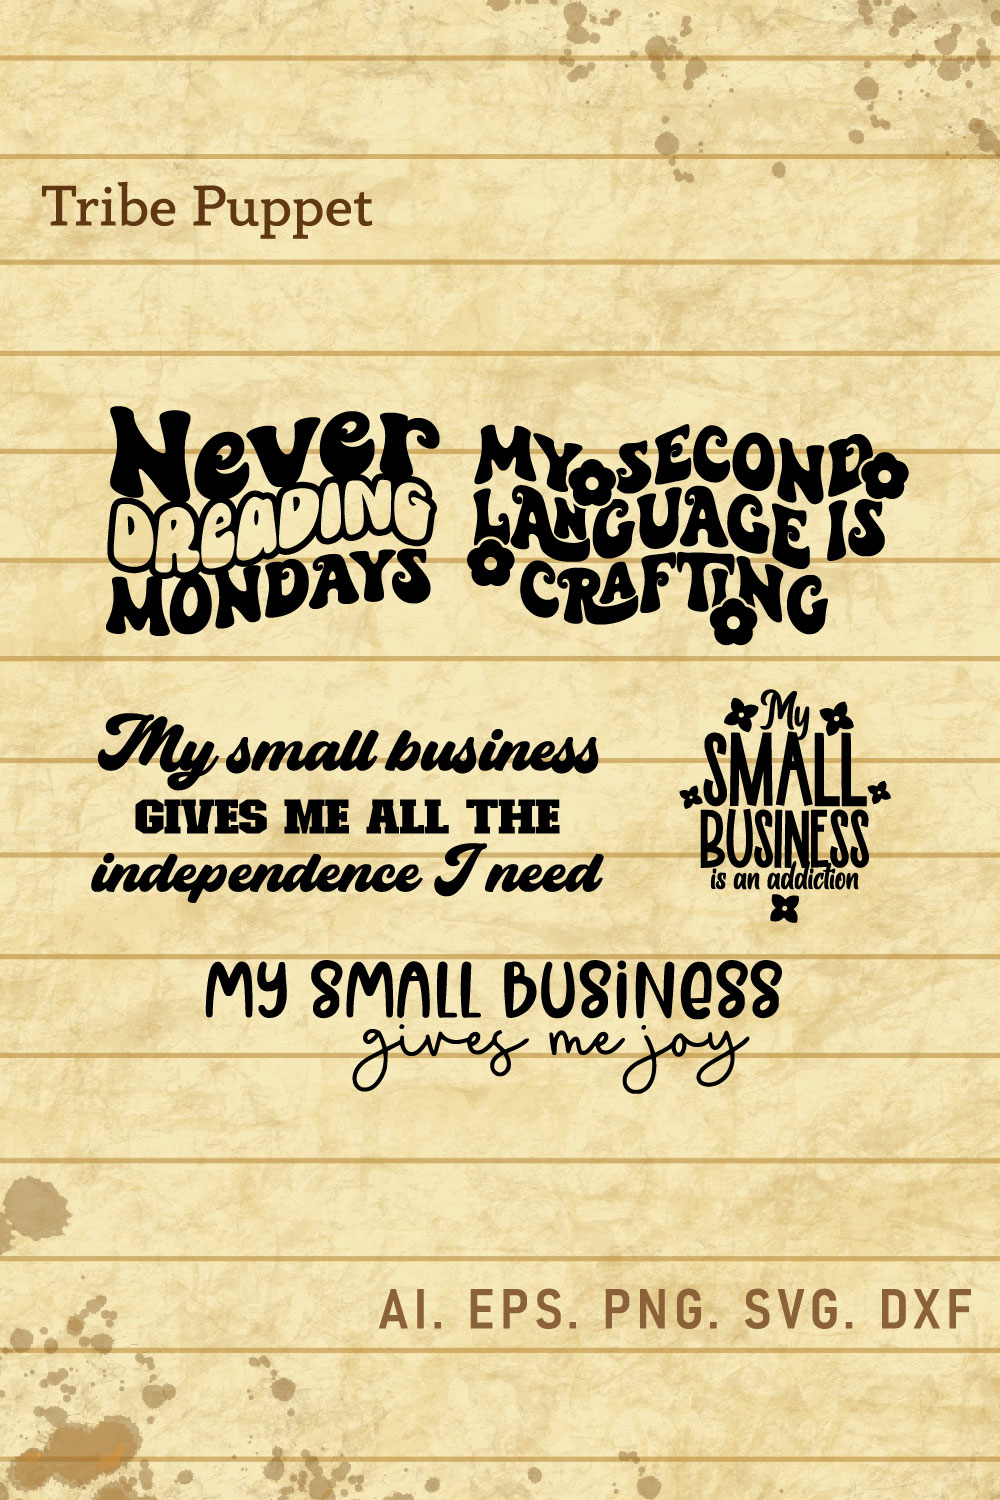 Small business owner quotes and sayings 11 pinterest preview image.